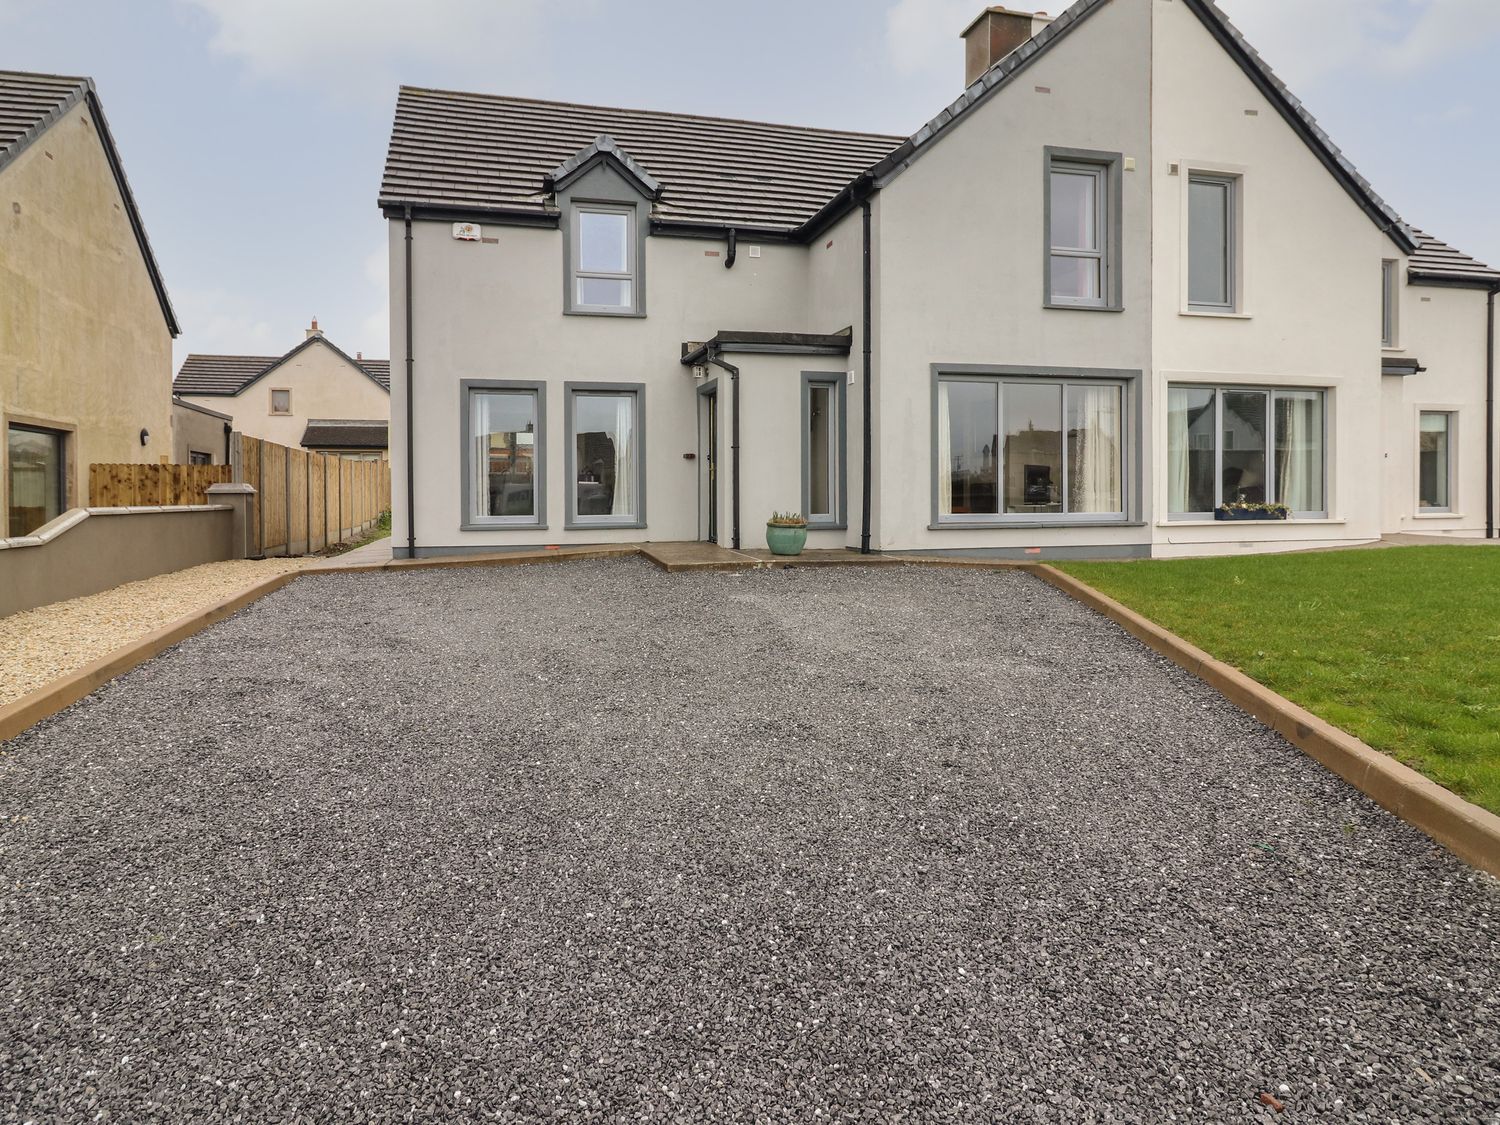 20 LIGHTHOUSE VILLAGE - County Kerry - 1130462 - photo 1